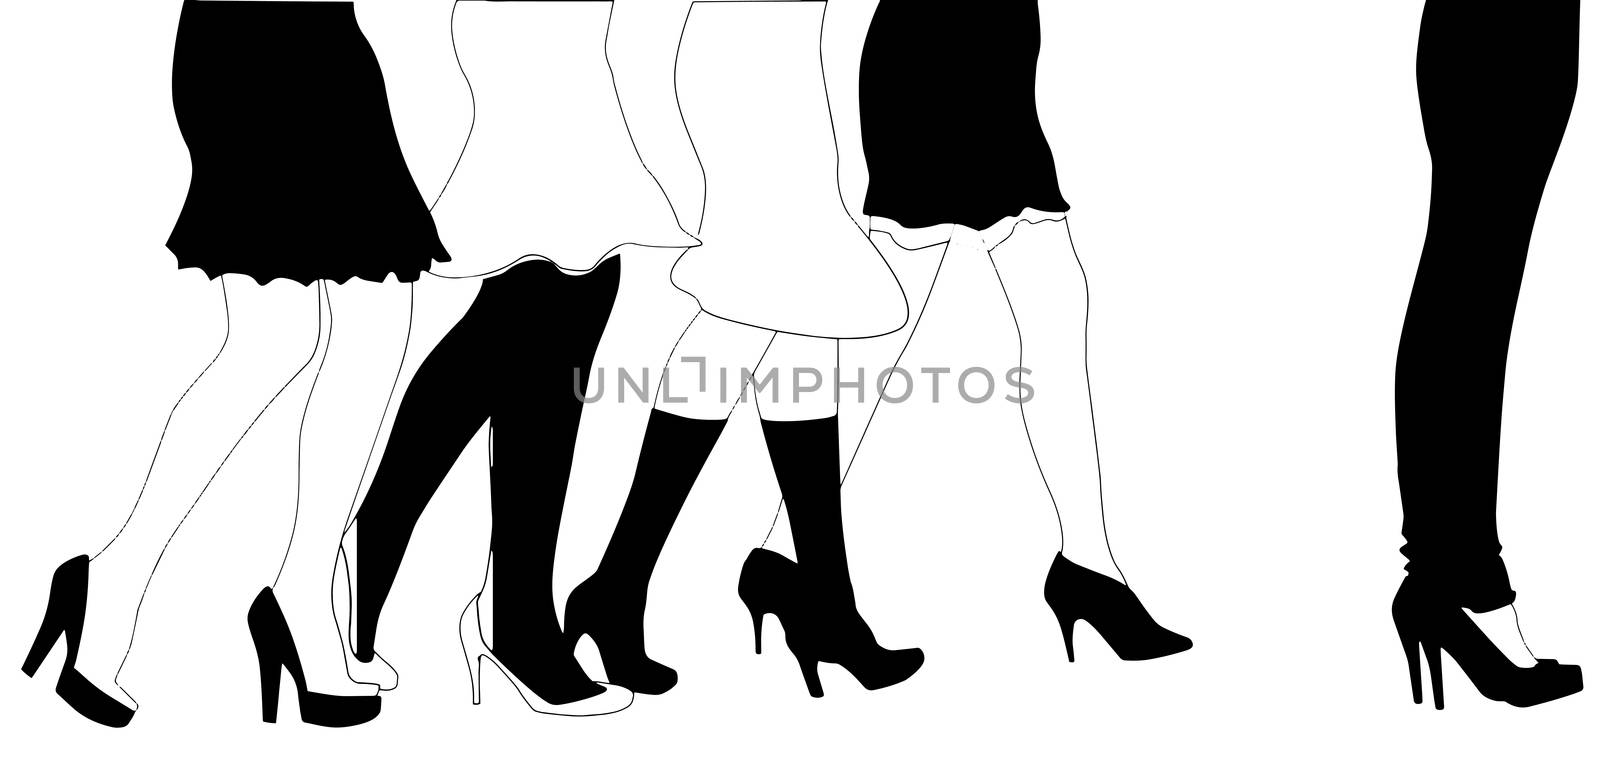 Walking legs in black and white isolated on a white background